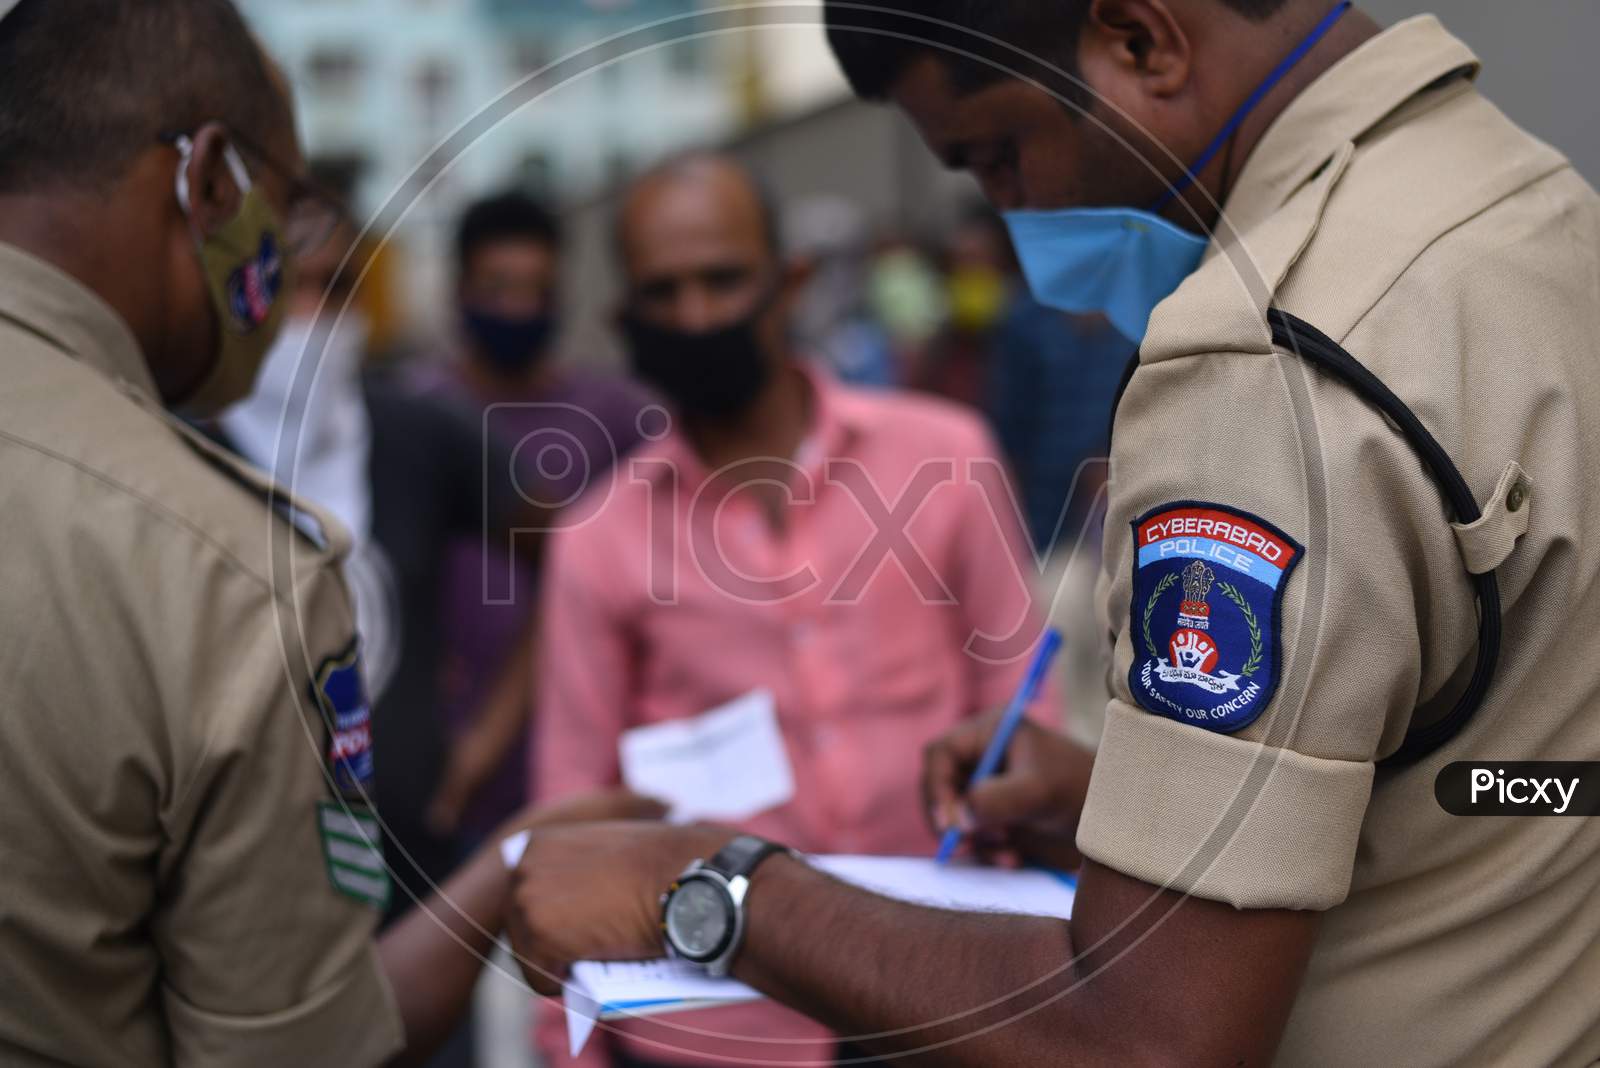 Cyberabad Police register the Migrant Workers from different states so that they can board a Shramik Special Train during an ongoing Nationwide Lockdown amid Coronavirus Pandemic, Kukatpally,Hyderabad, May 19,2020